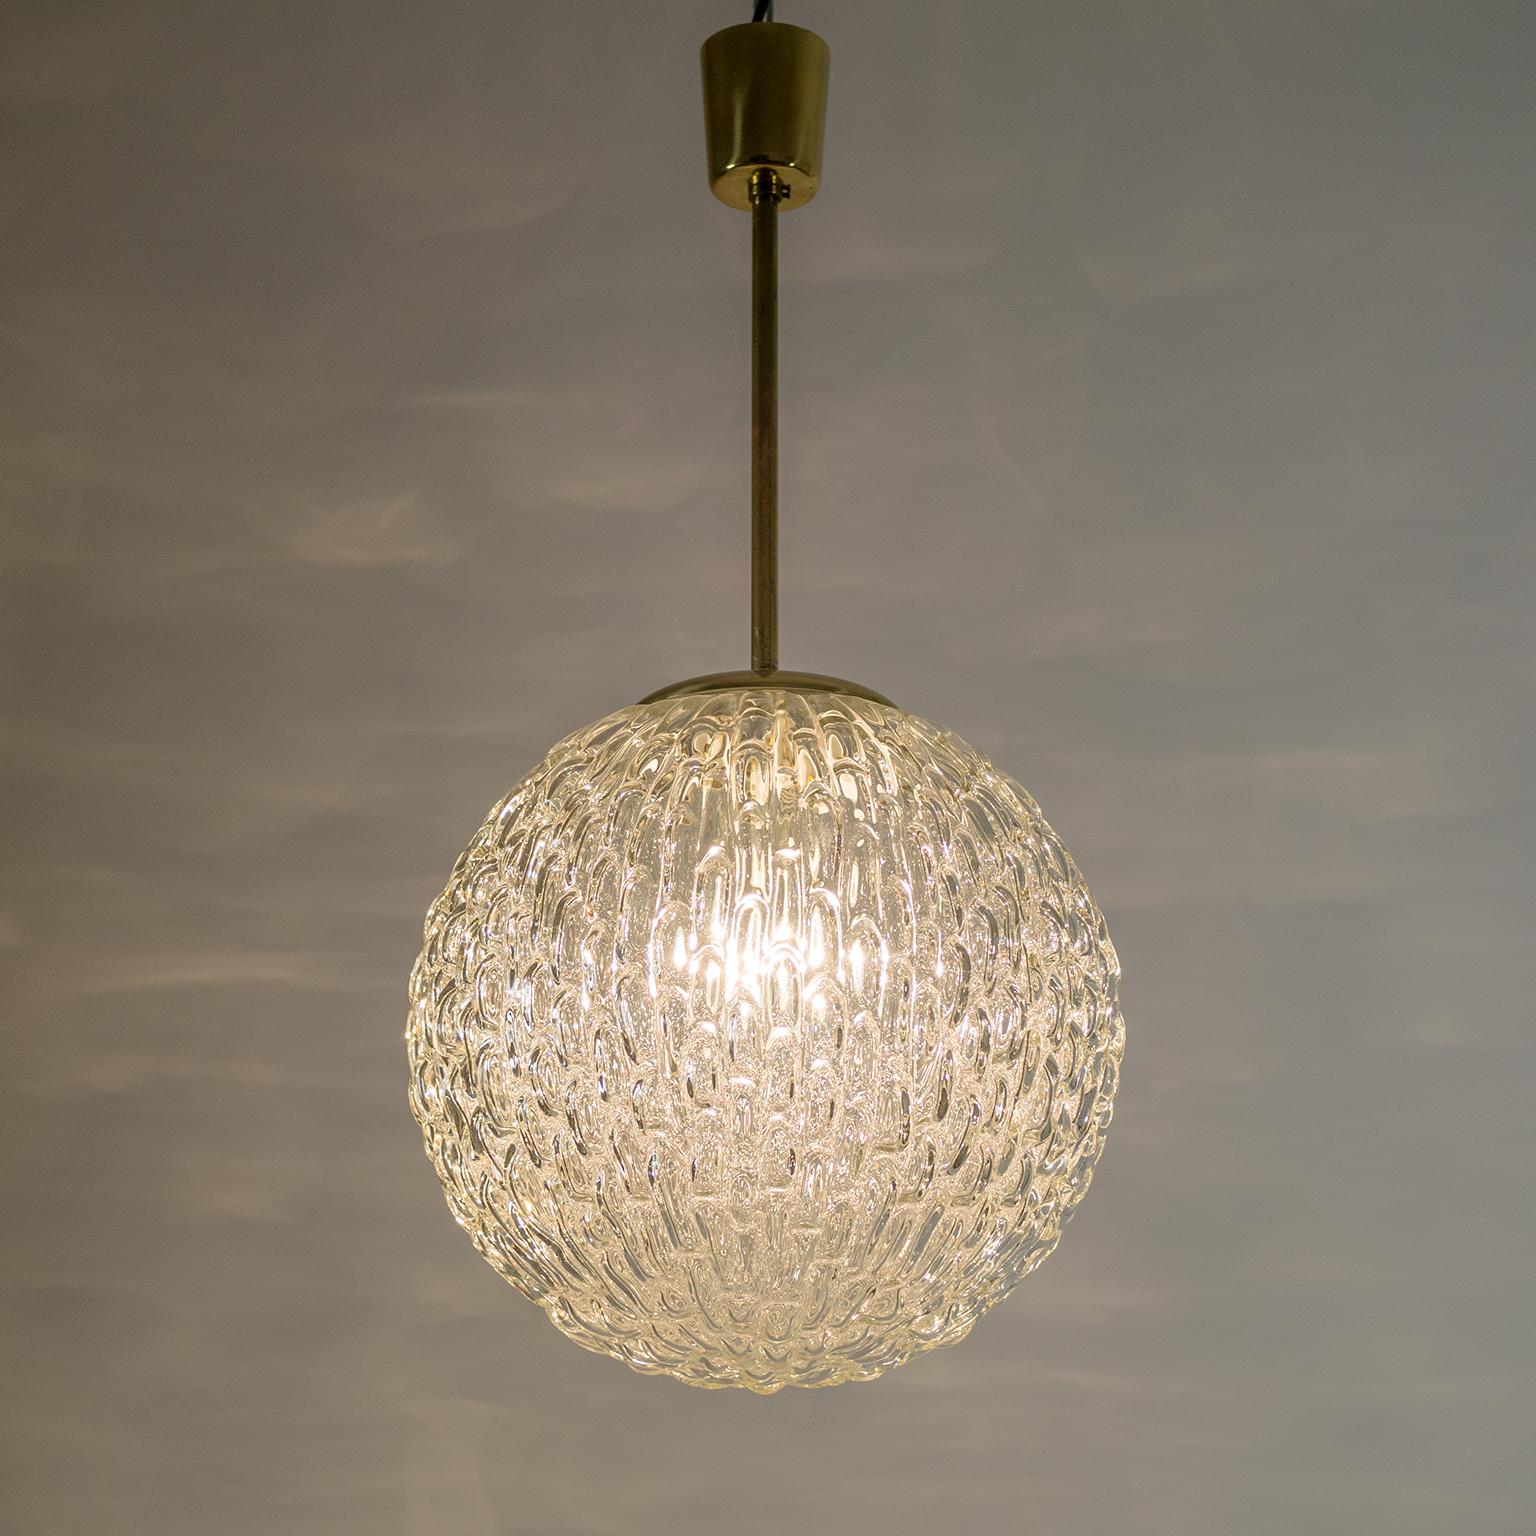 Mid-Century Modern Large Textured Glass and Brass Pendant, Austria, 1950s